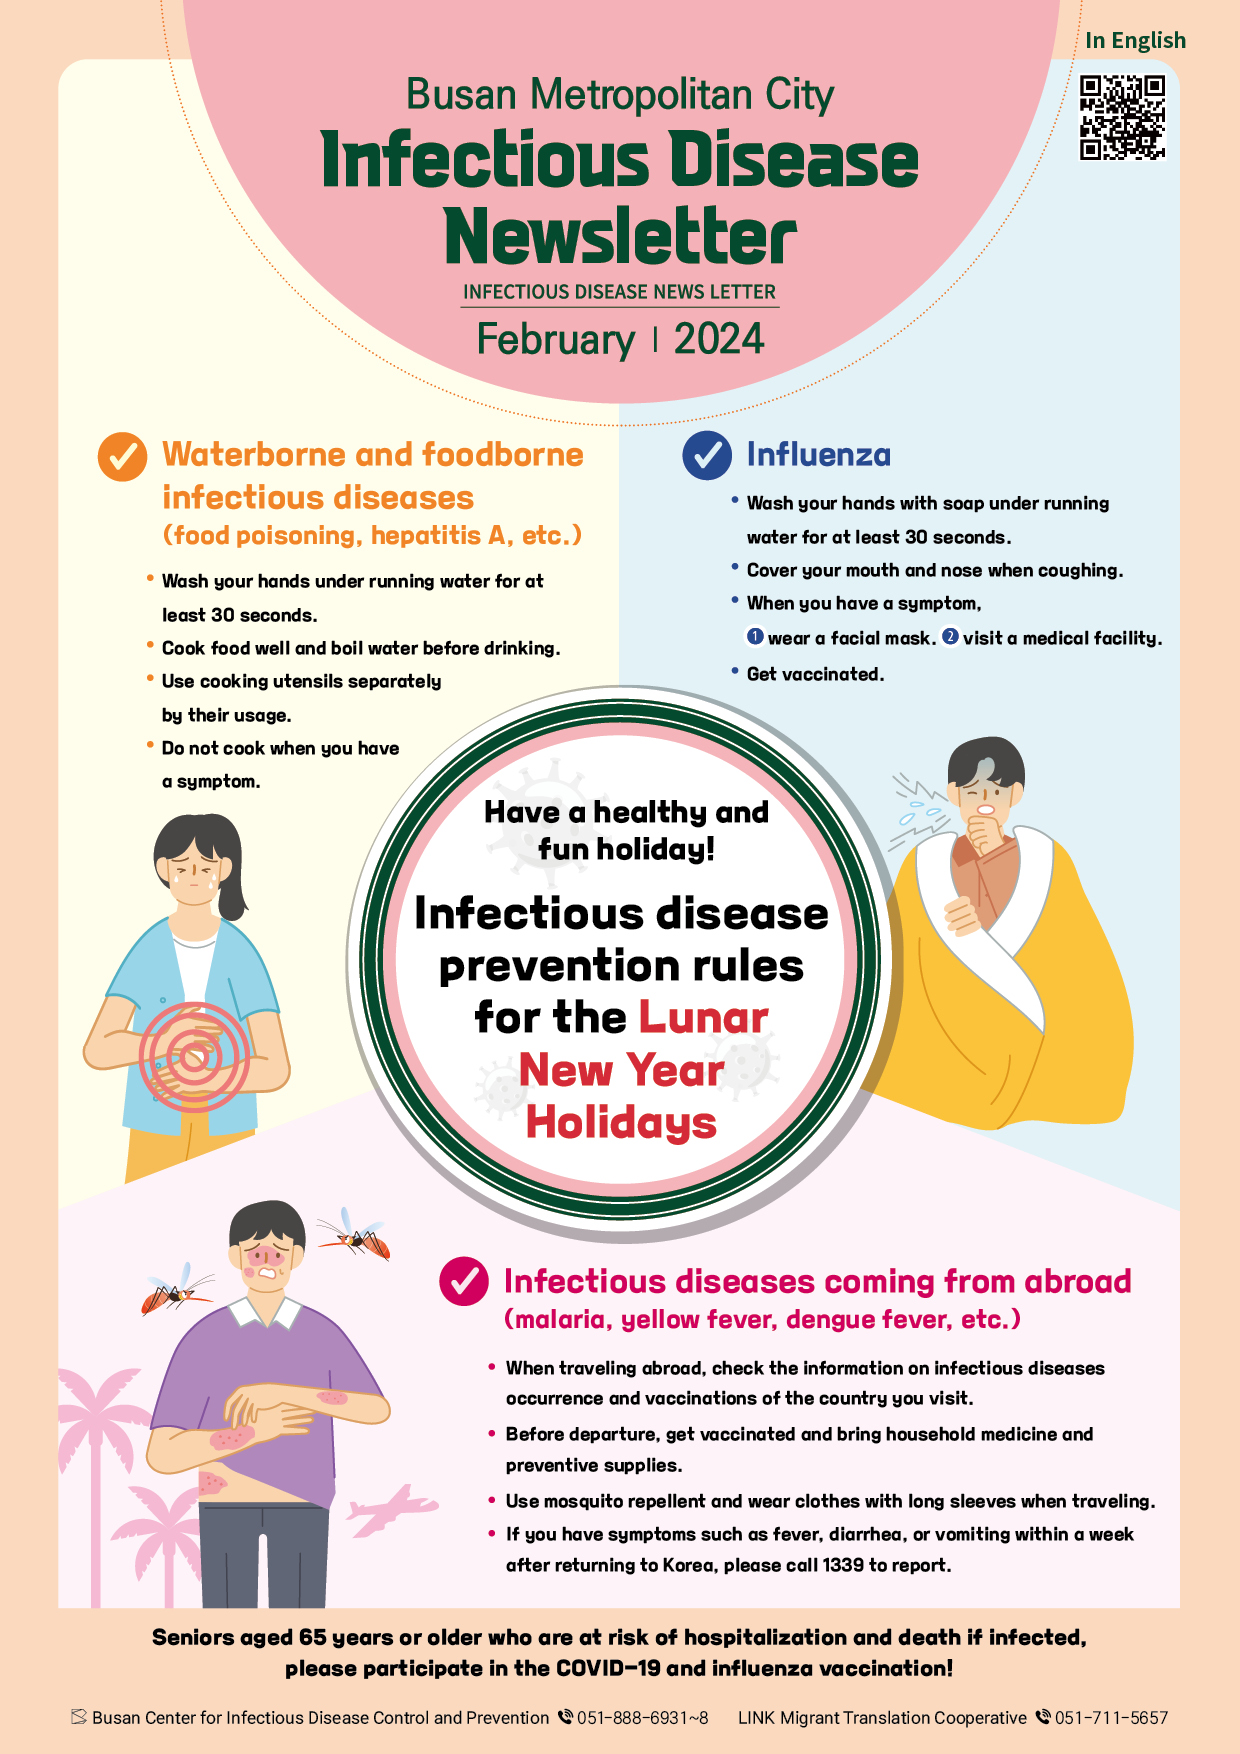 Infectious Disease Newsletter (Feb. 2024) in English